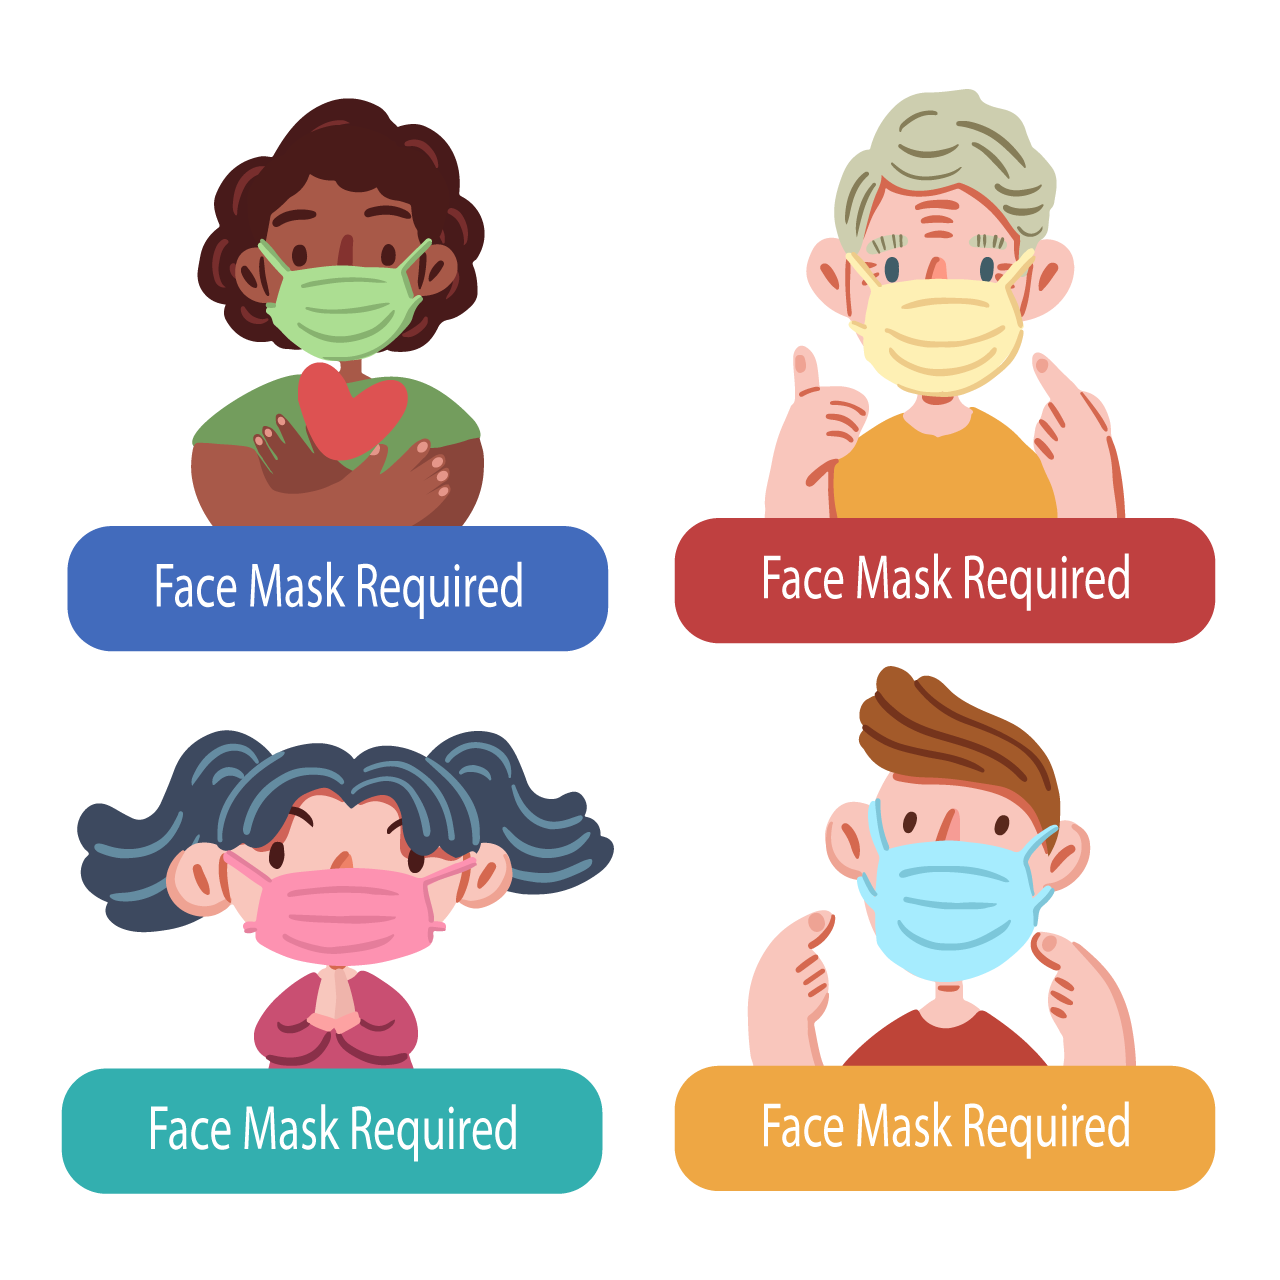 Face mask required pack cartoon illustration image hand drawing sketch